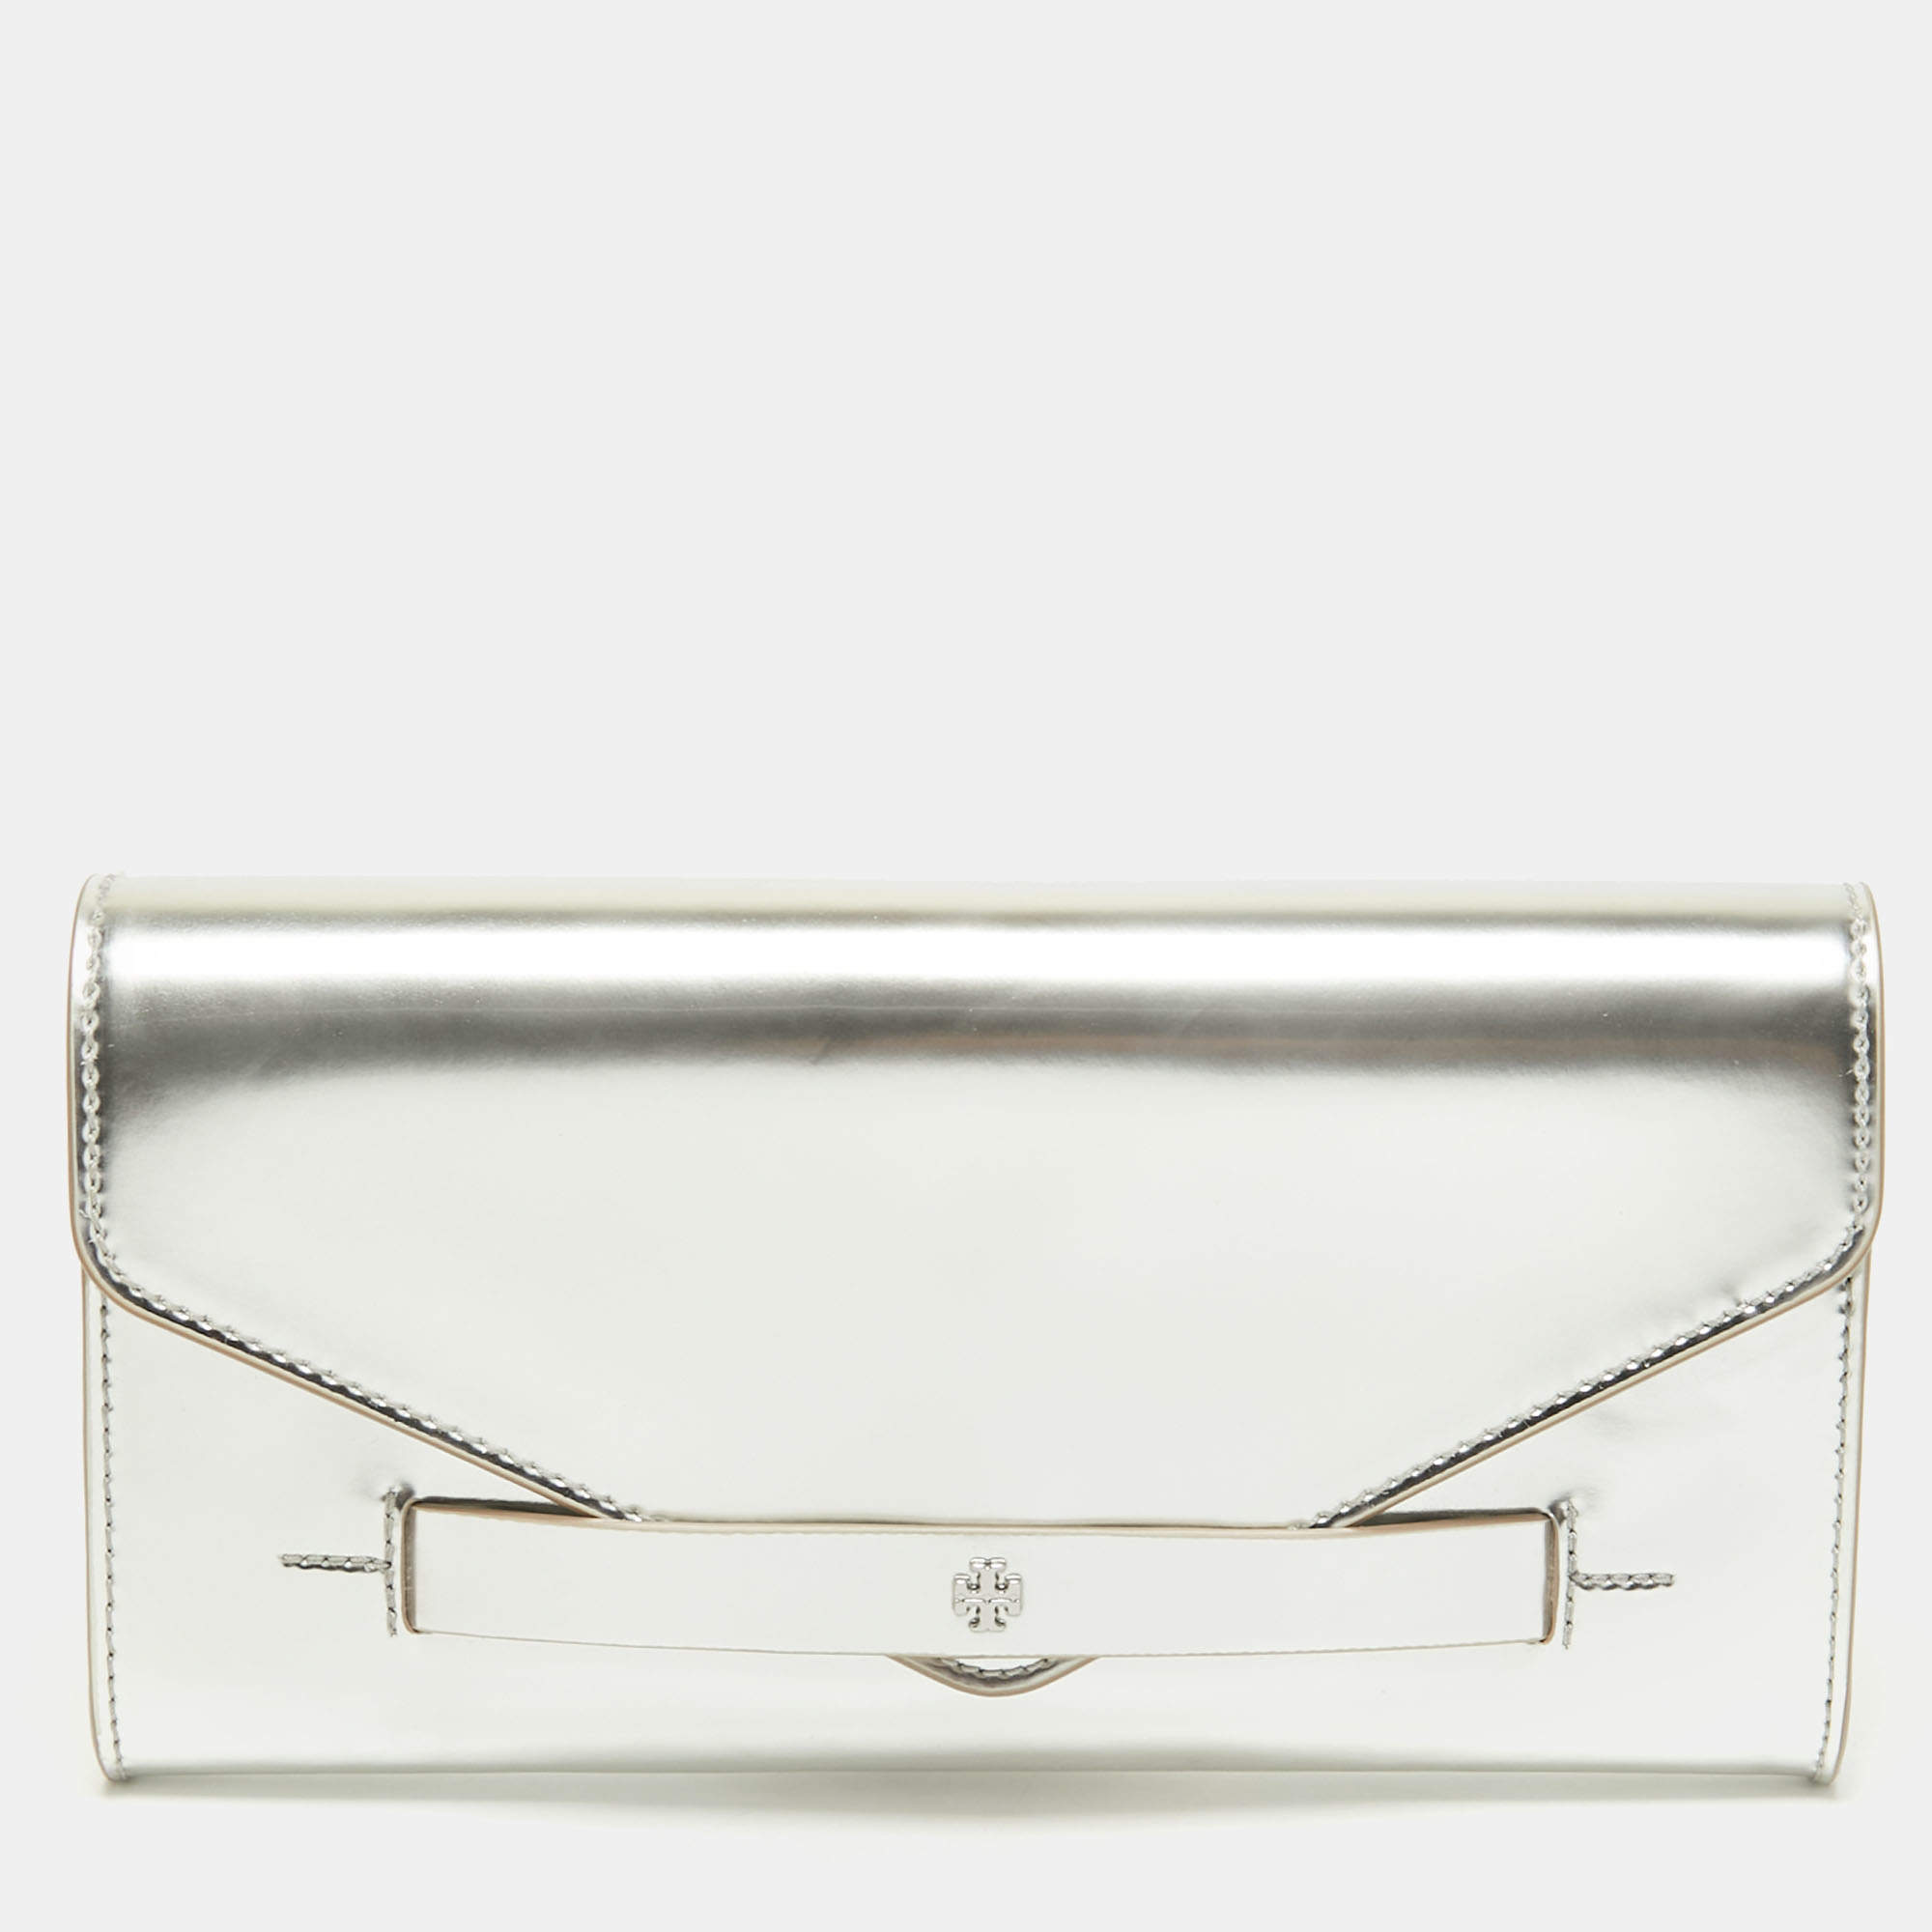 Tory Burch Black And silver Clutch! ****preowned*** 